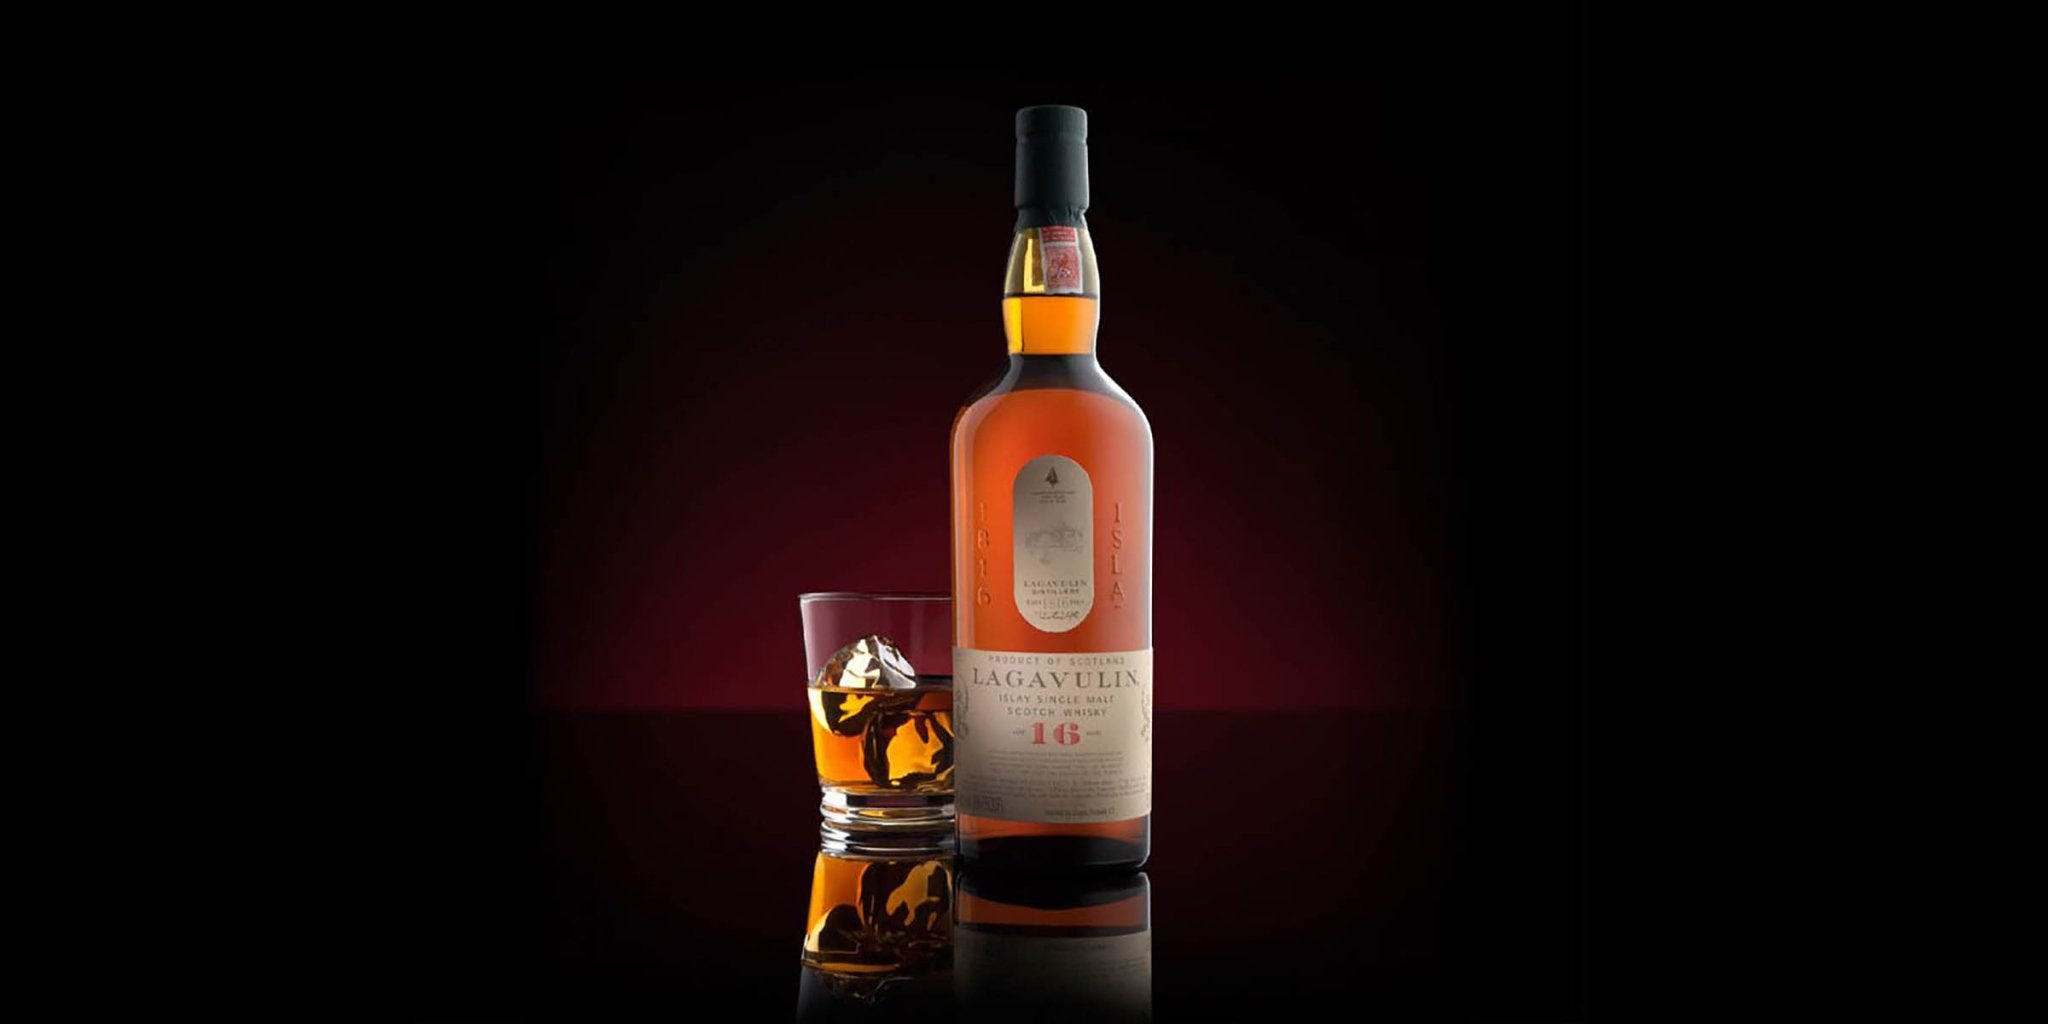 Lagavulin 16 Year Old Islay Single Malt Scotch Whisky | Exquisite Wine & Alcohol Gift Delivery Toronto Canada | Vyno